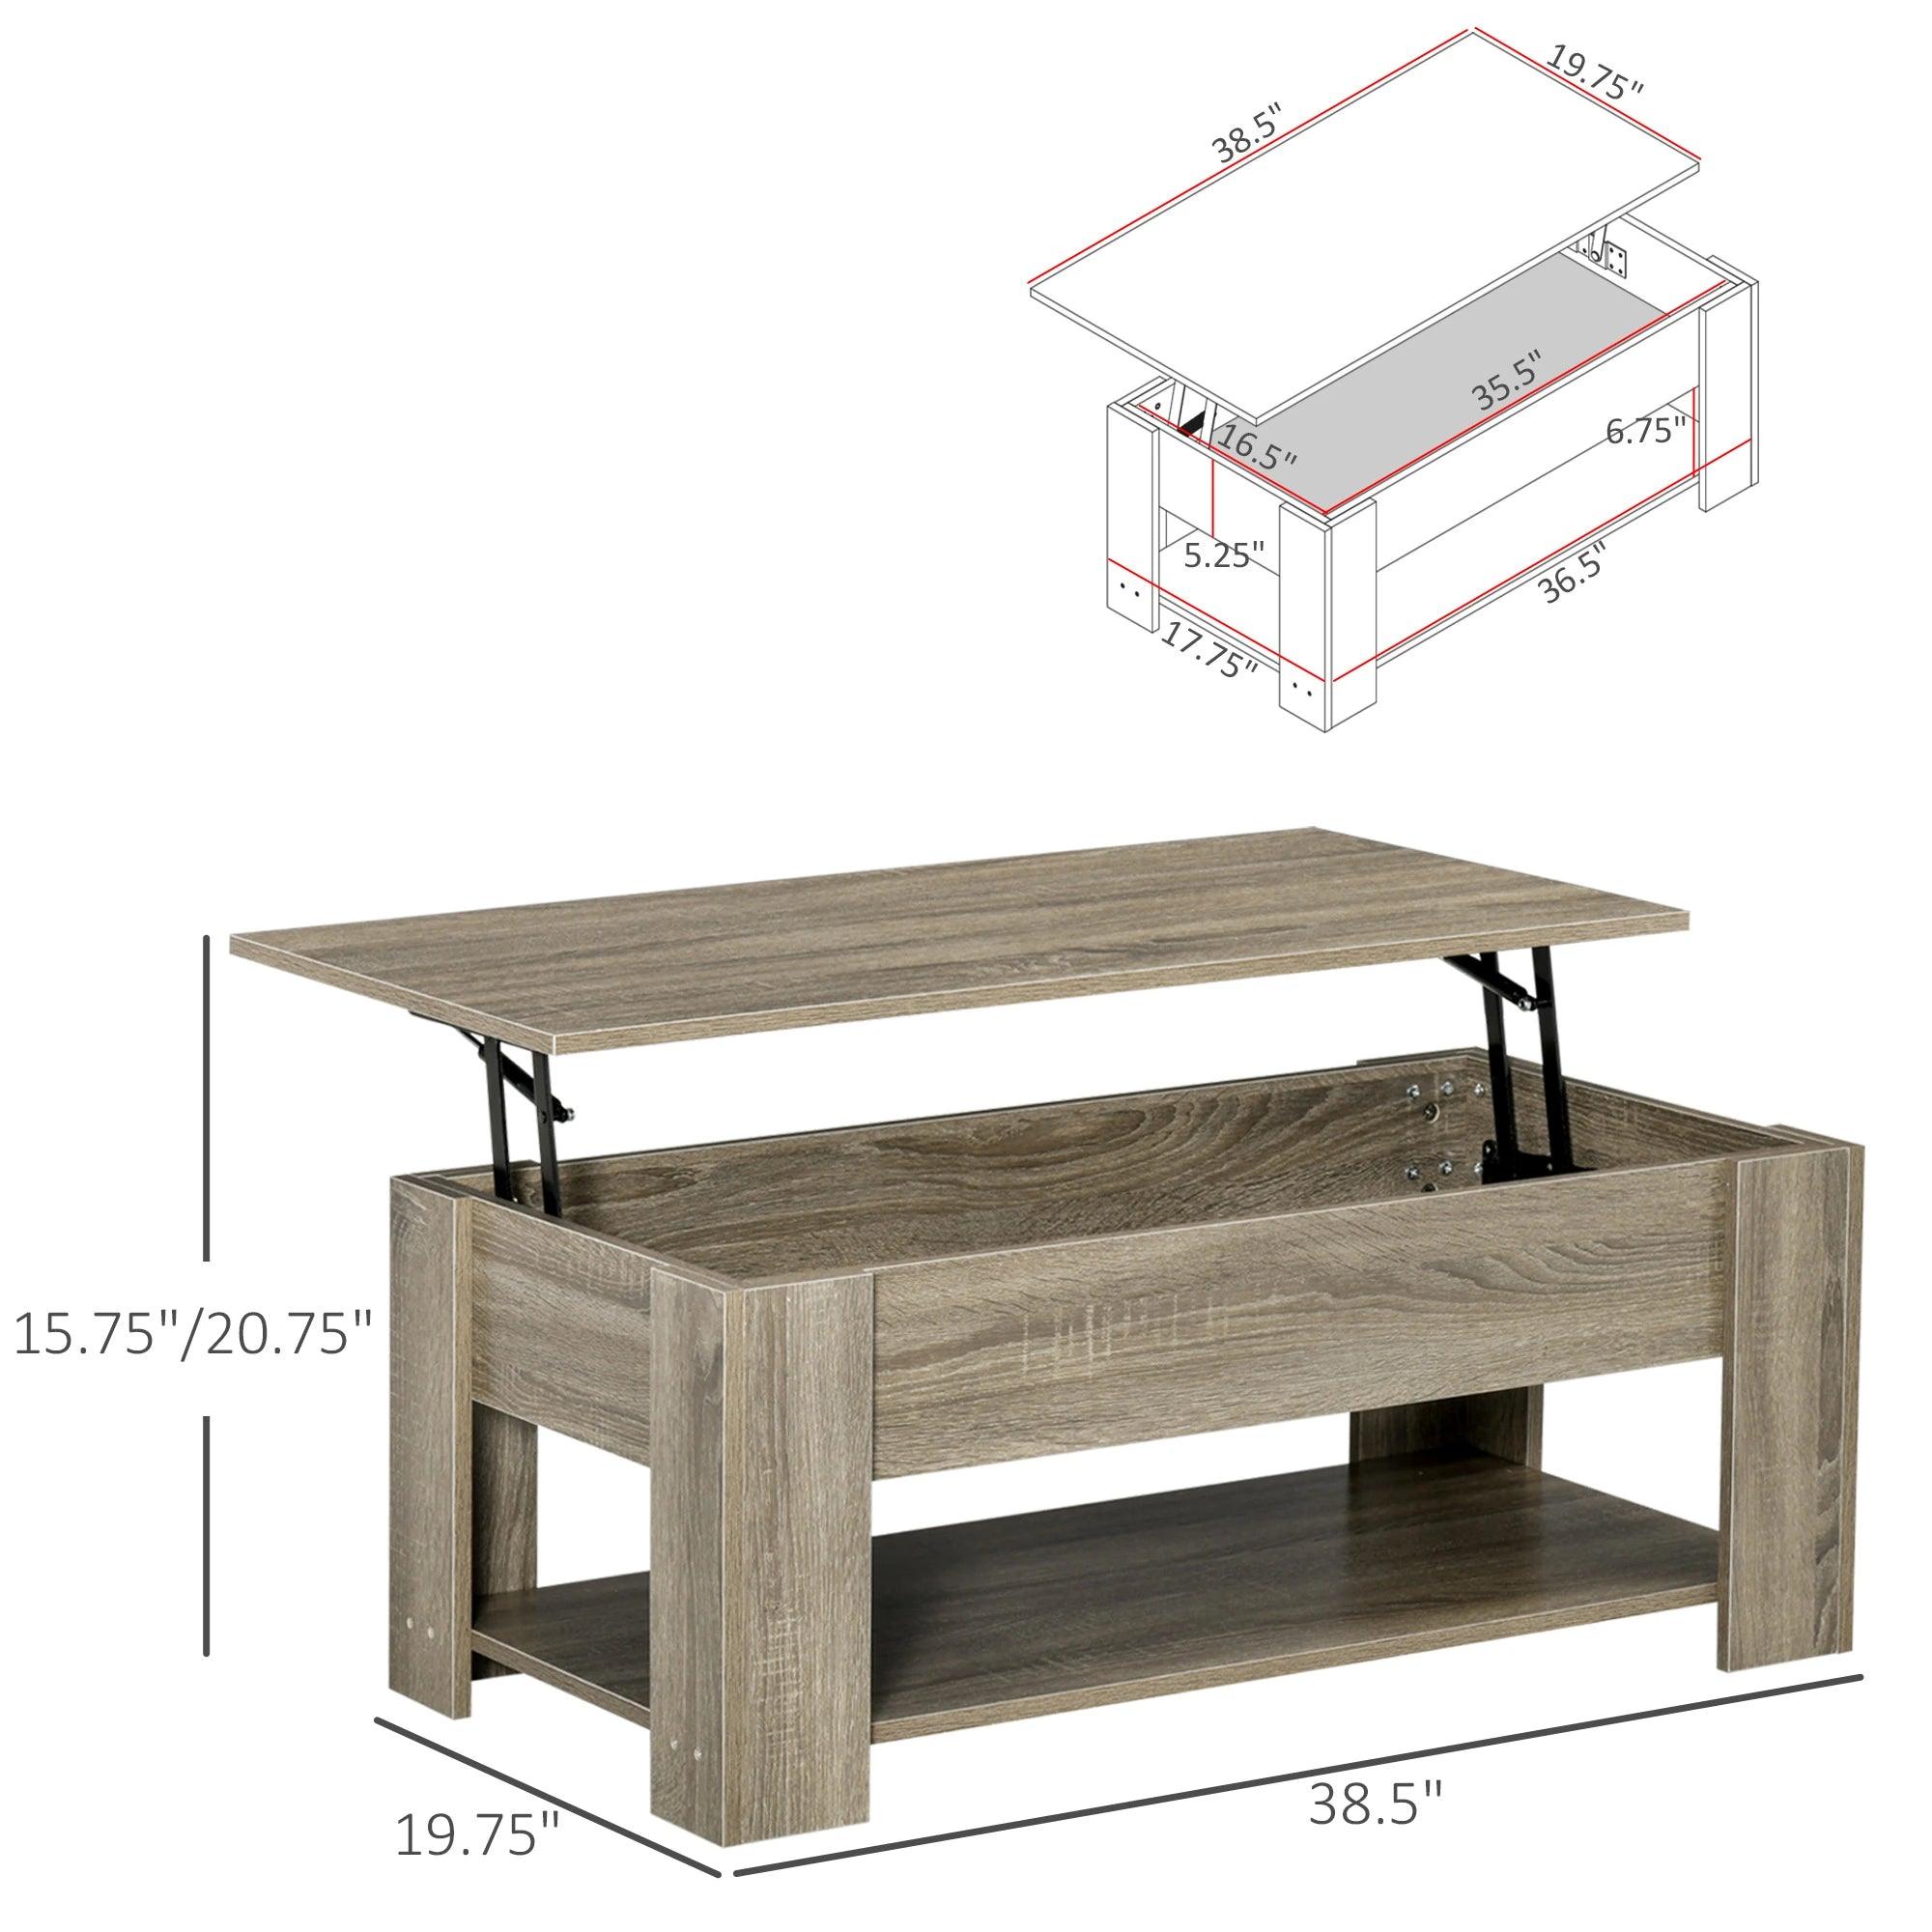 Lift Top Coffee Table with Hidden Storage Compartment and Open Shelf, Center Table for Living Room, Grey